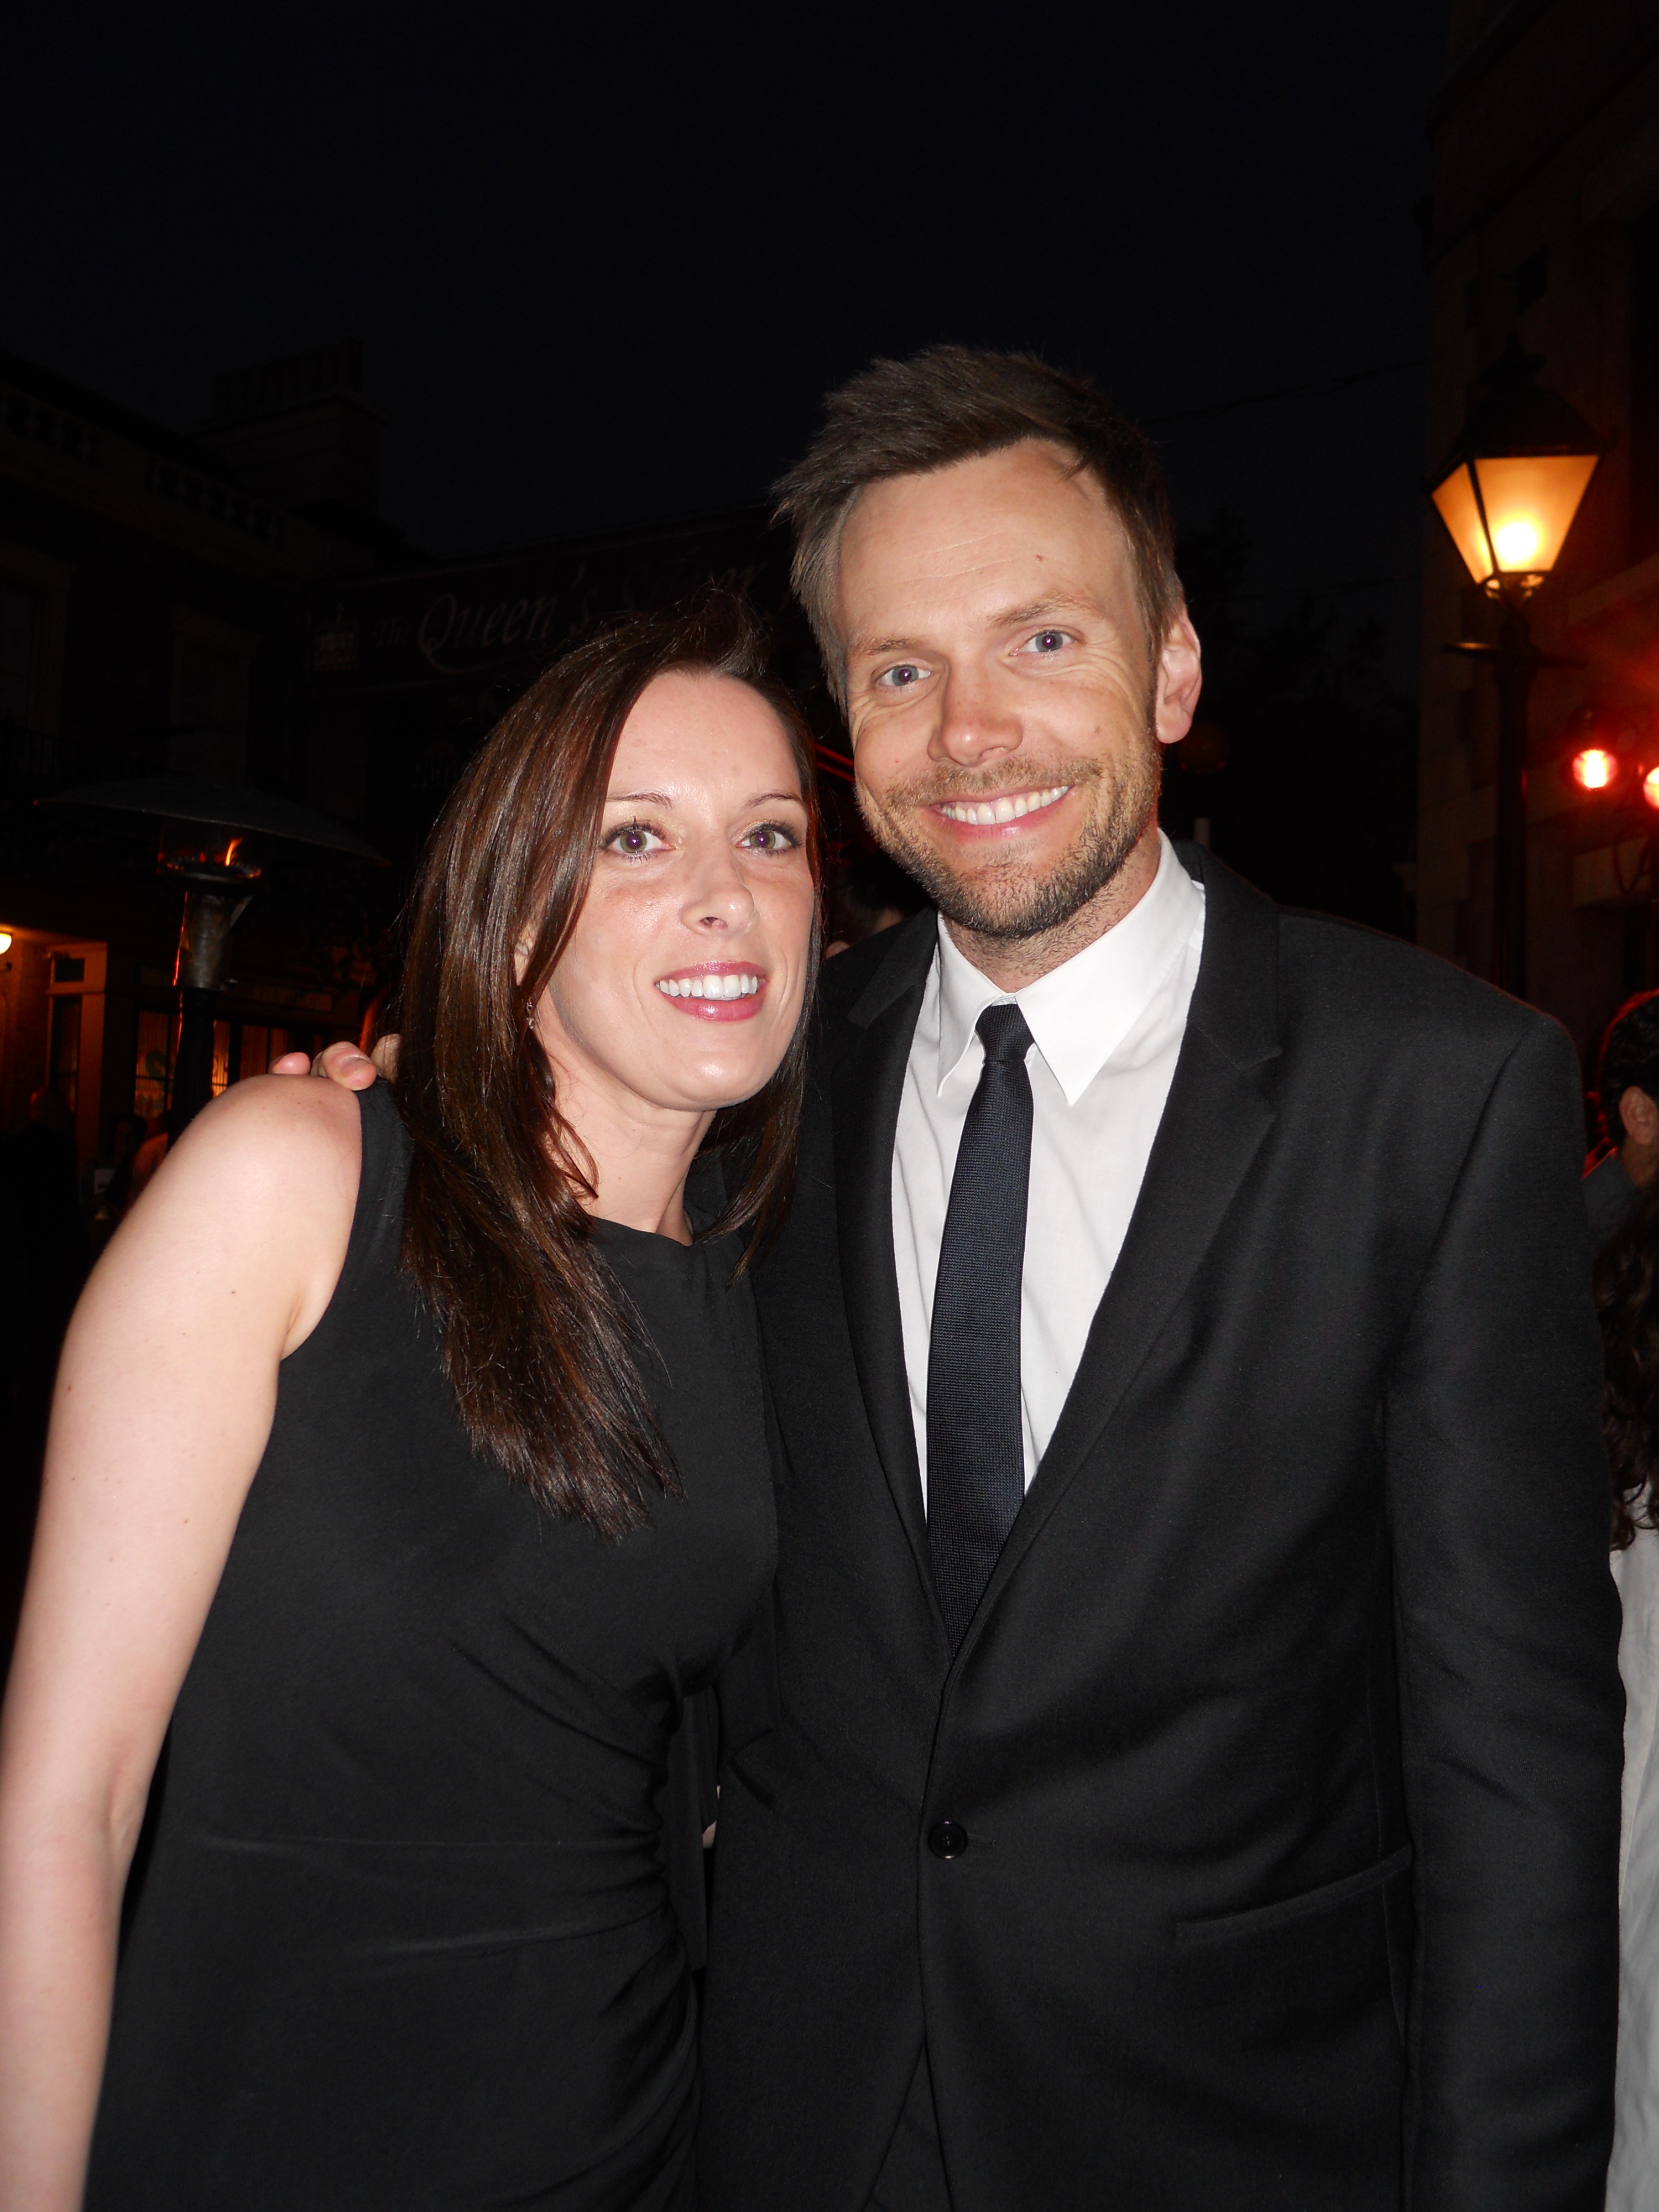 Amy Mader and Joel McHale at Gala del Sol